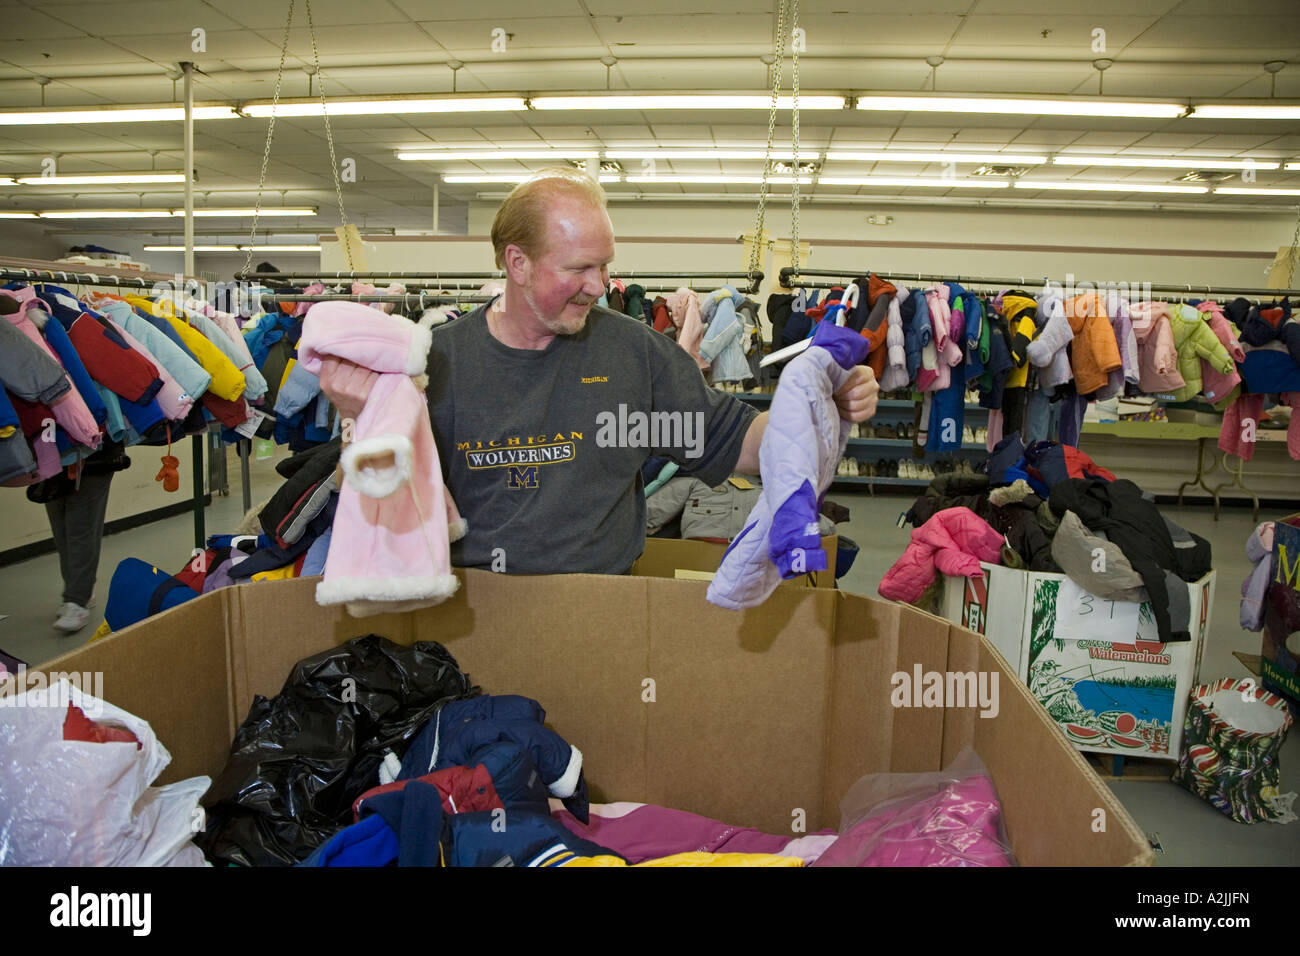 Volunteer Sorts Clothing for Needy Families Stock Photo